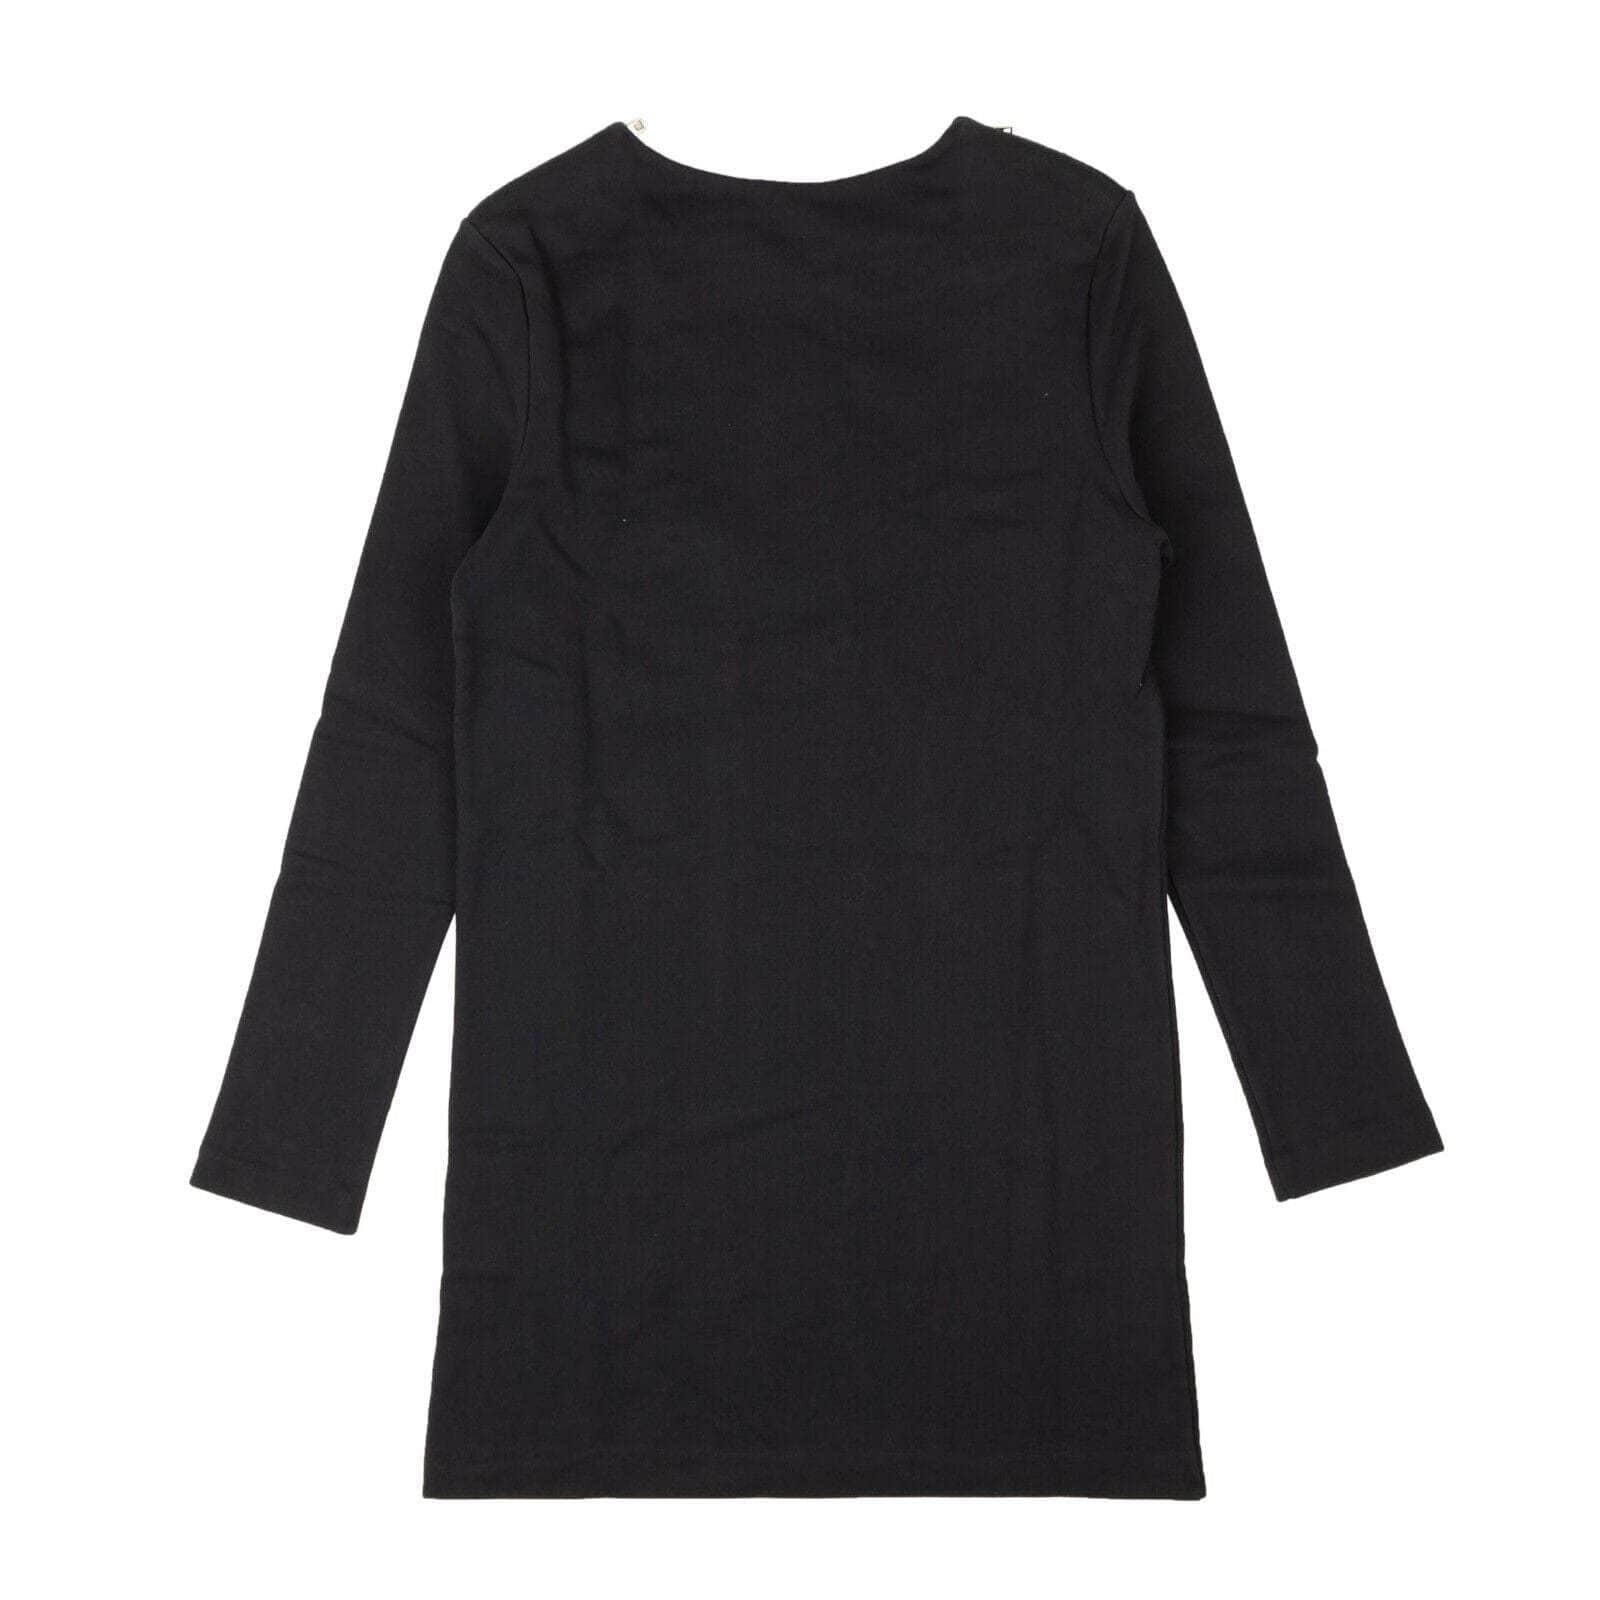 A_Plan_Application a_plan_application, channelenable-all, chicmi, couponcollection, gender-womens, main-clothing, size-s, under-250, womens-sweater-dresses S Navy Blue Shoulder Zip Sweater Dress 95-APA-0001/S 95-APA-0001/S